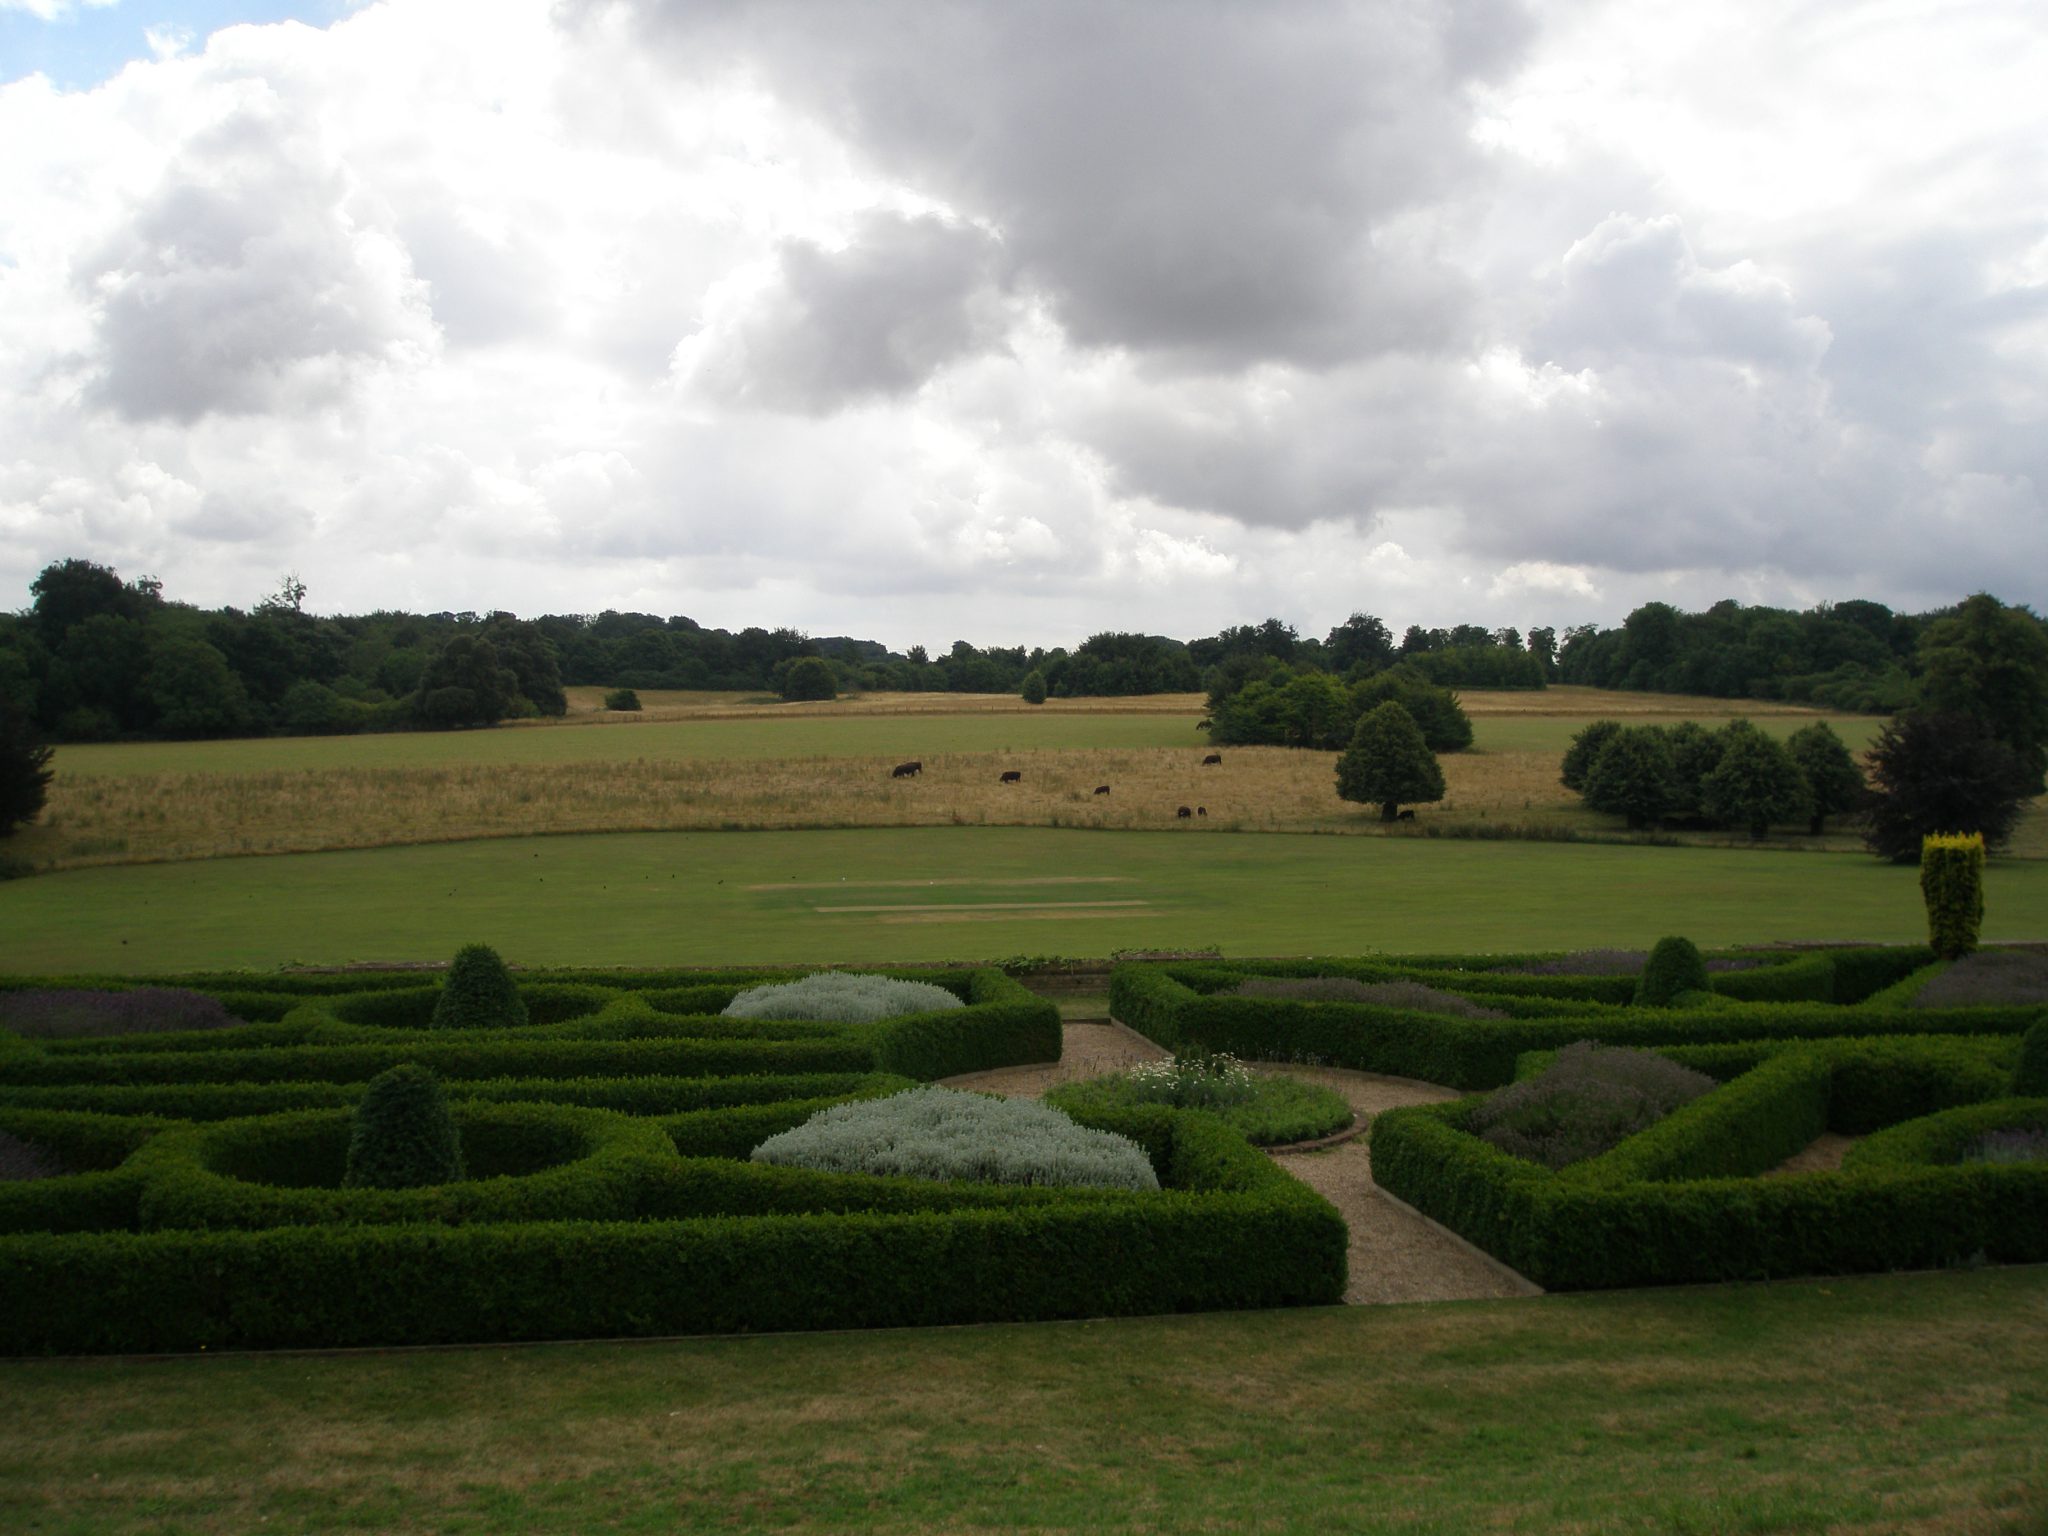 Our perambulations through the gardens at Goodnestone Park at an end, I took this one, last look across the East-Side Parterre. This quiet garden was a hard place to leave....